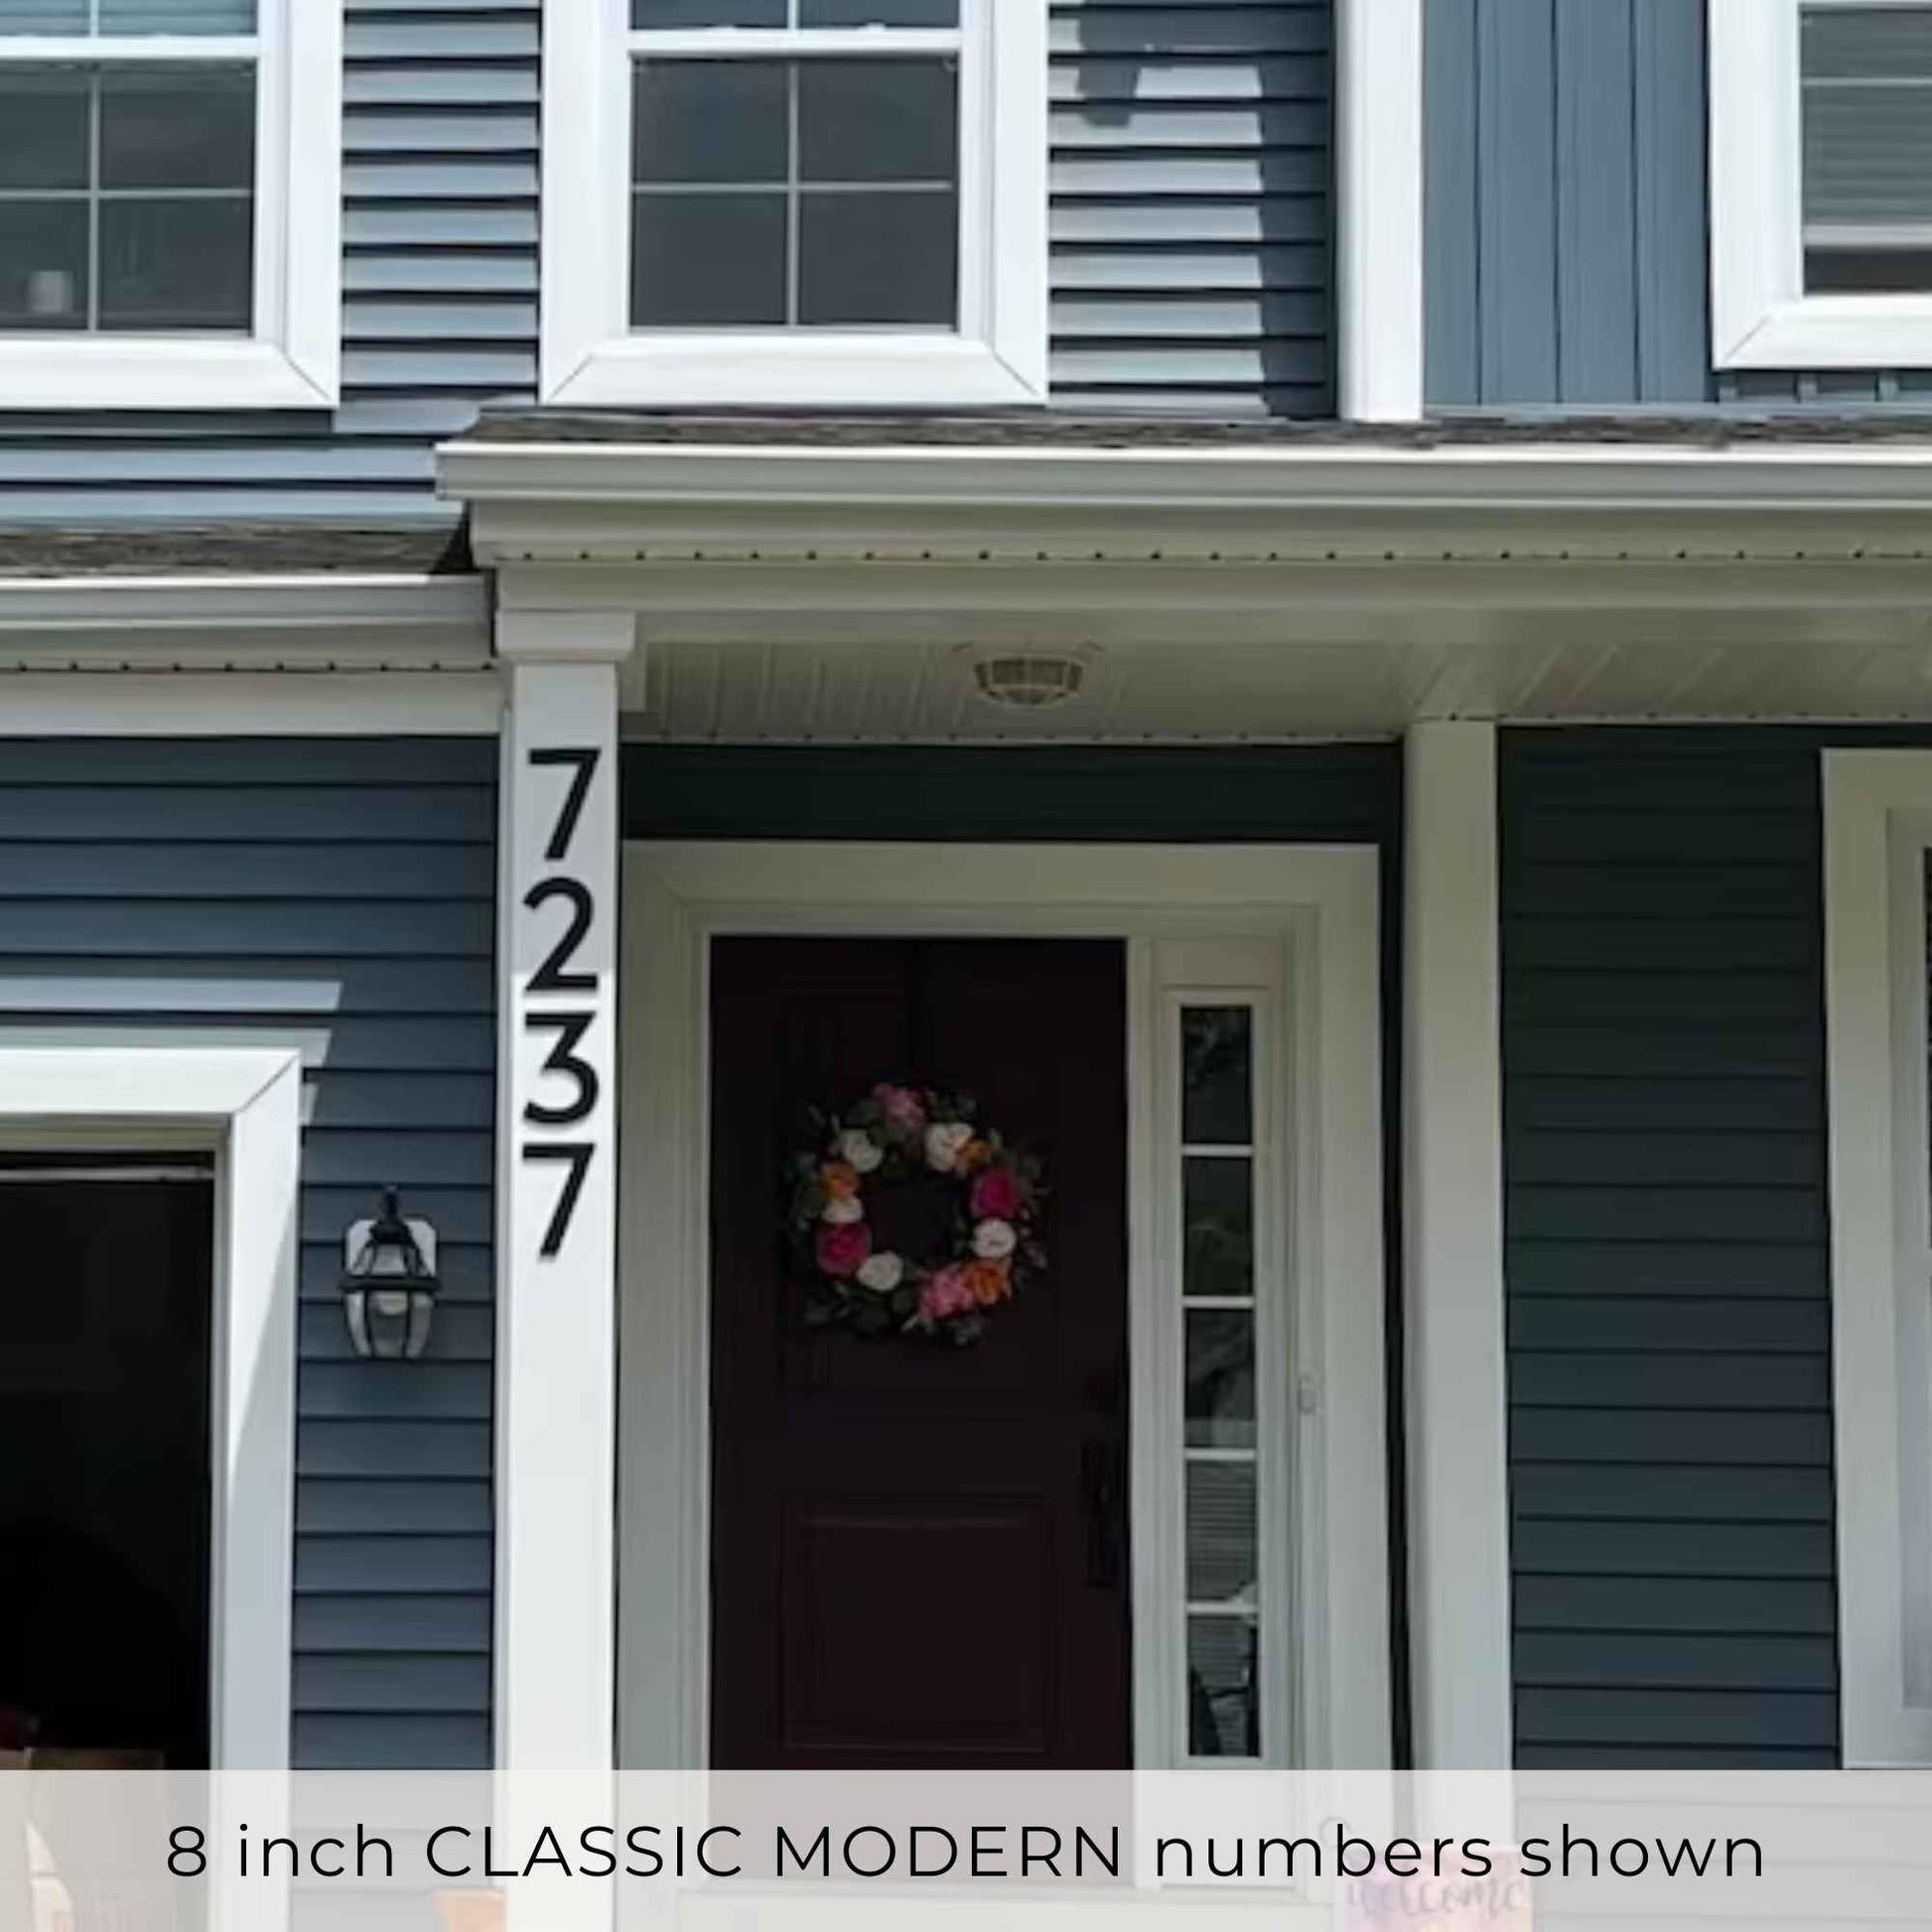 CLASSIC MODERN house numbers and letters